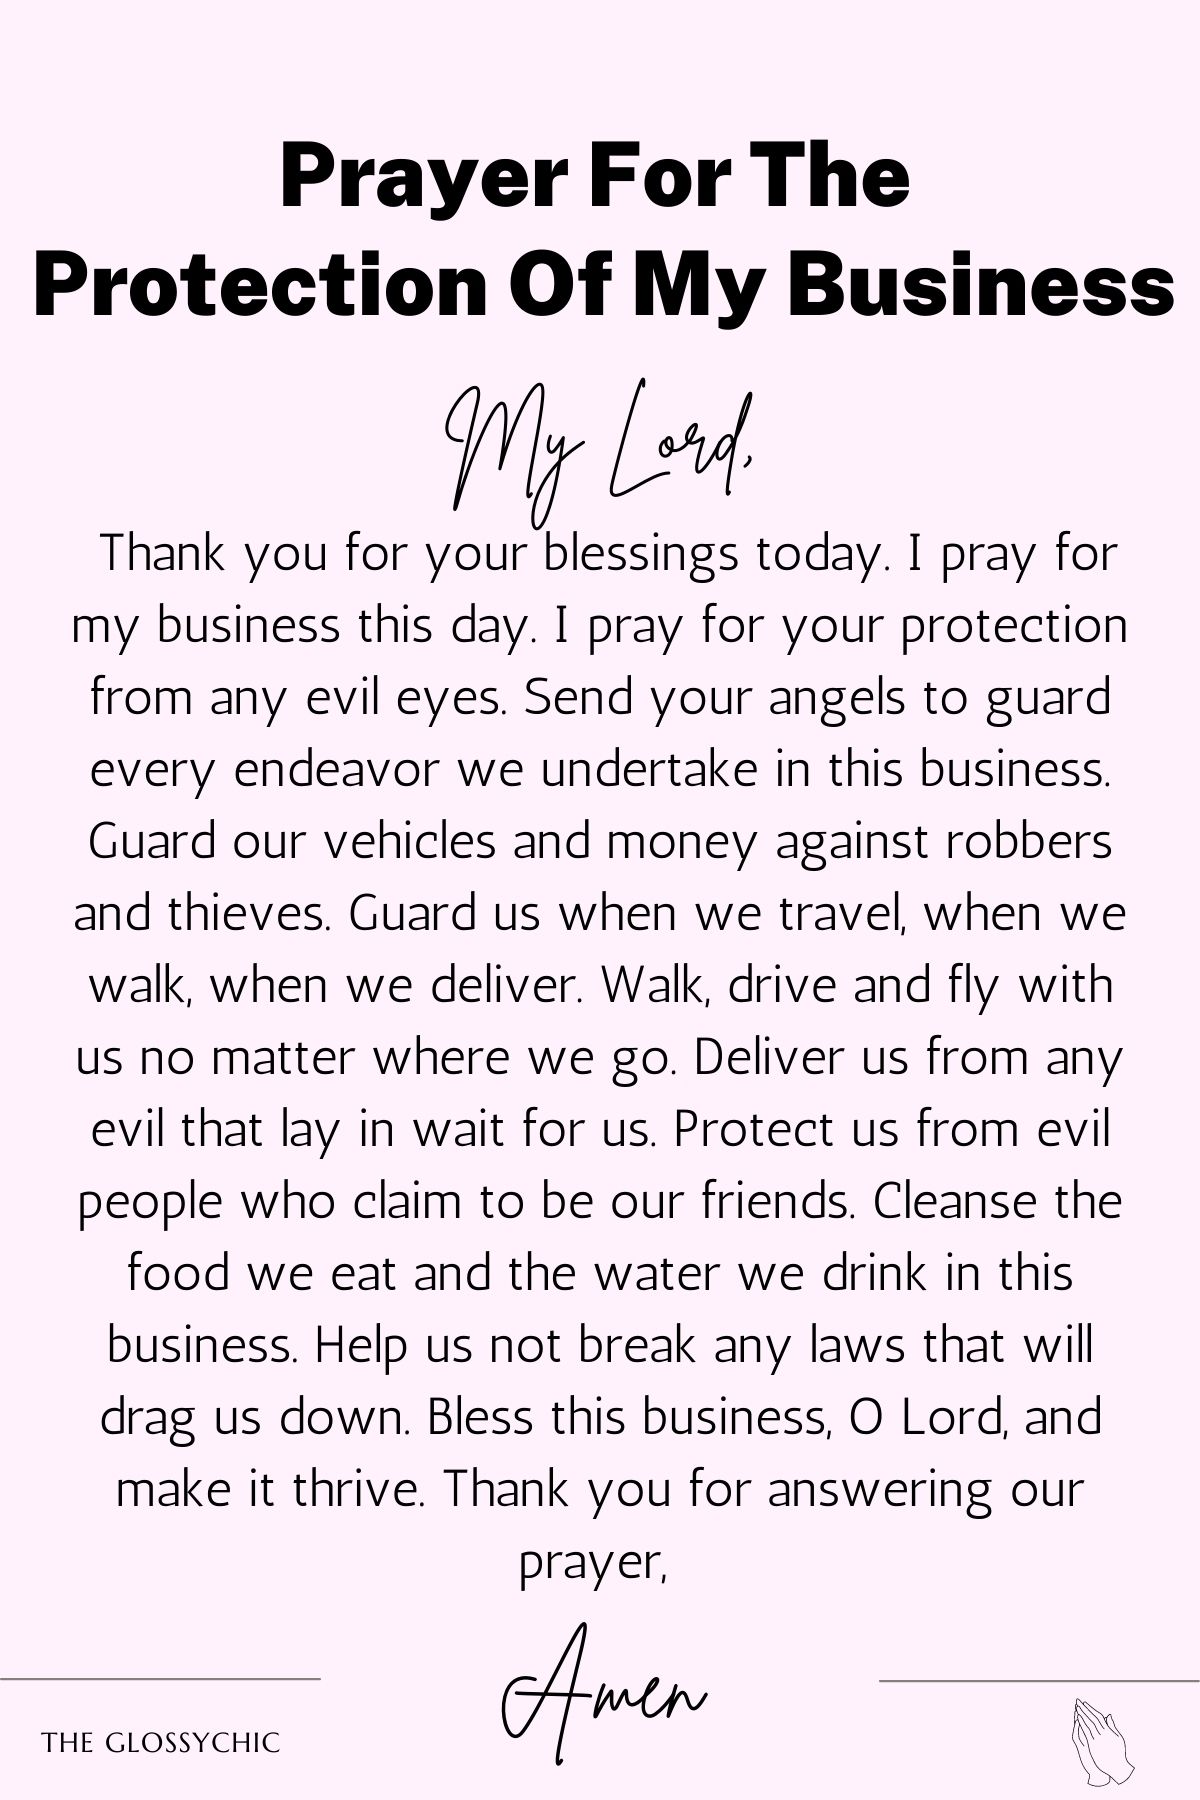 Prayer for the protection of my business